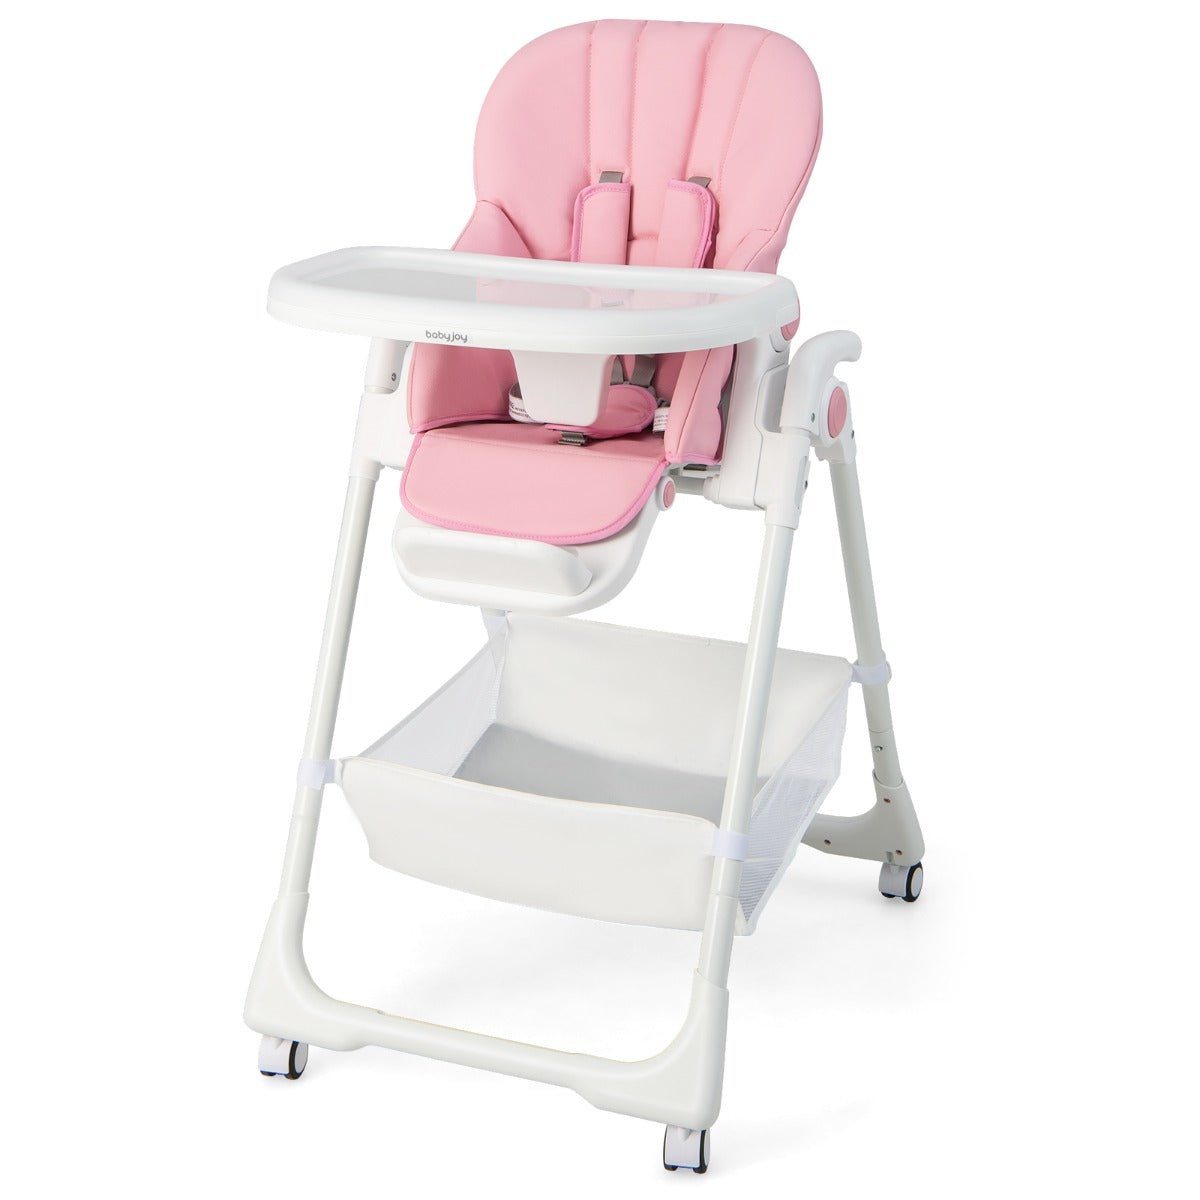 Shop Now - Infant High Chair in Pink